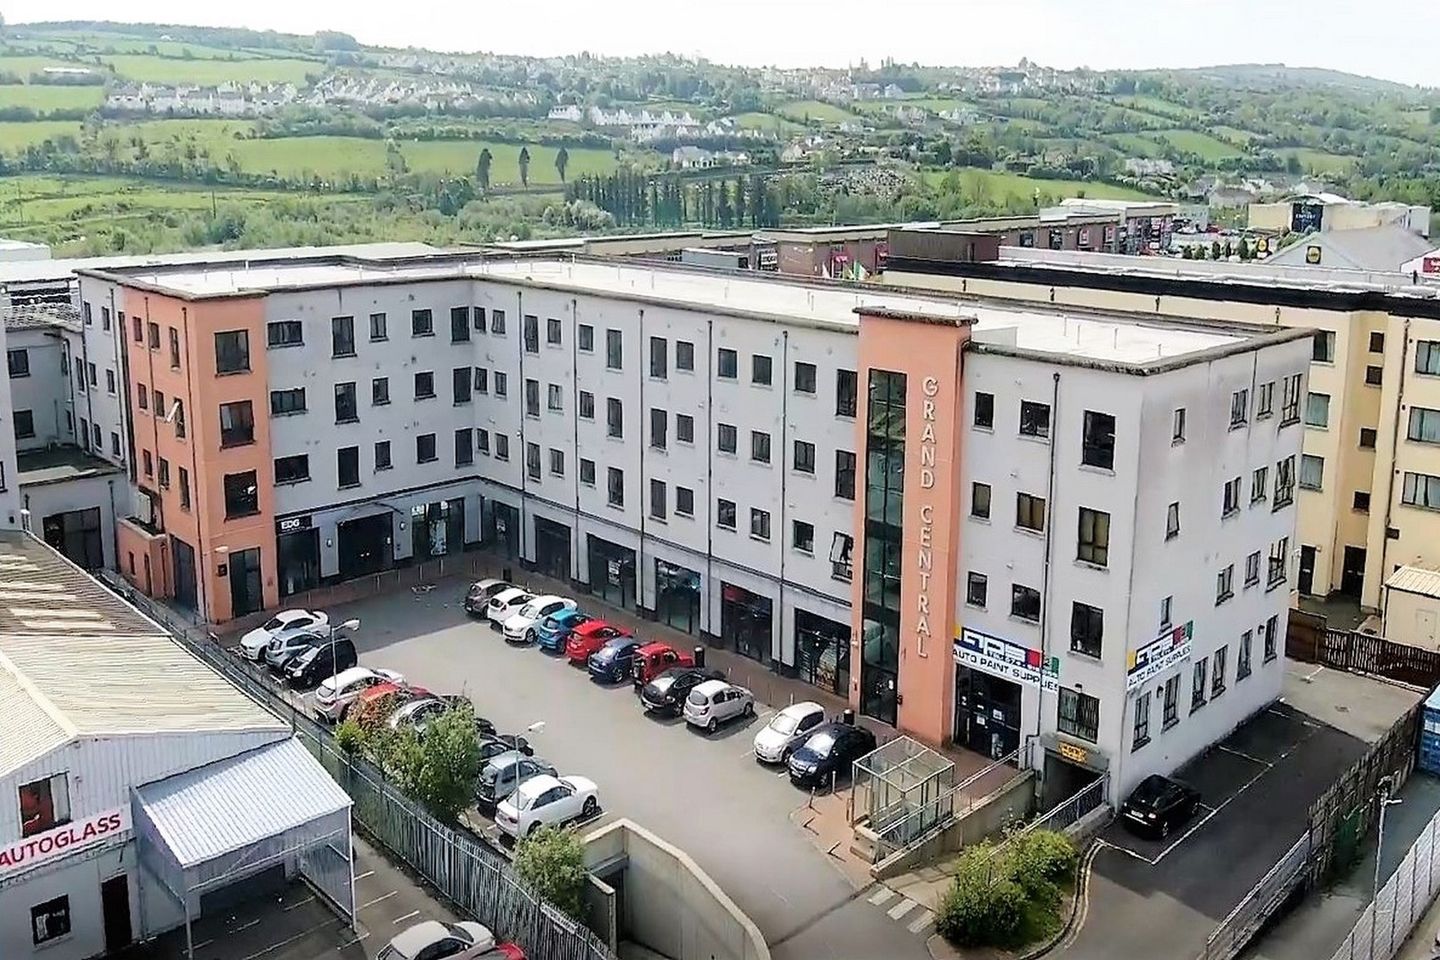 Apartment 44, Grand Central, Letterkenny, Co. Donegal